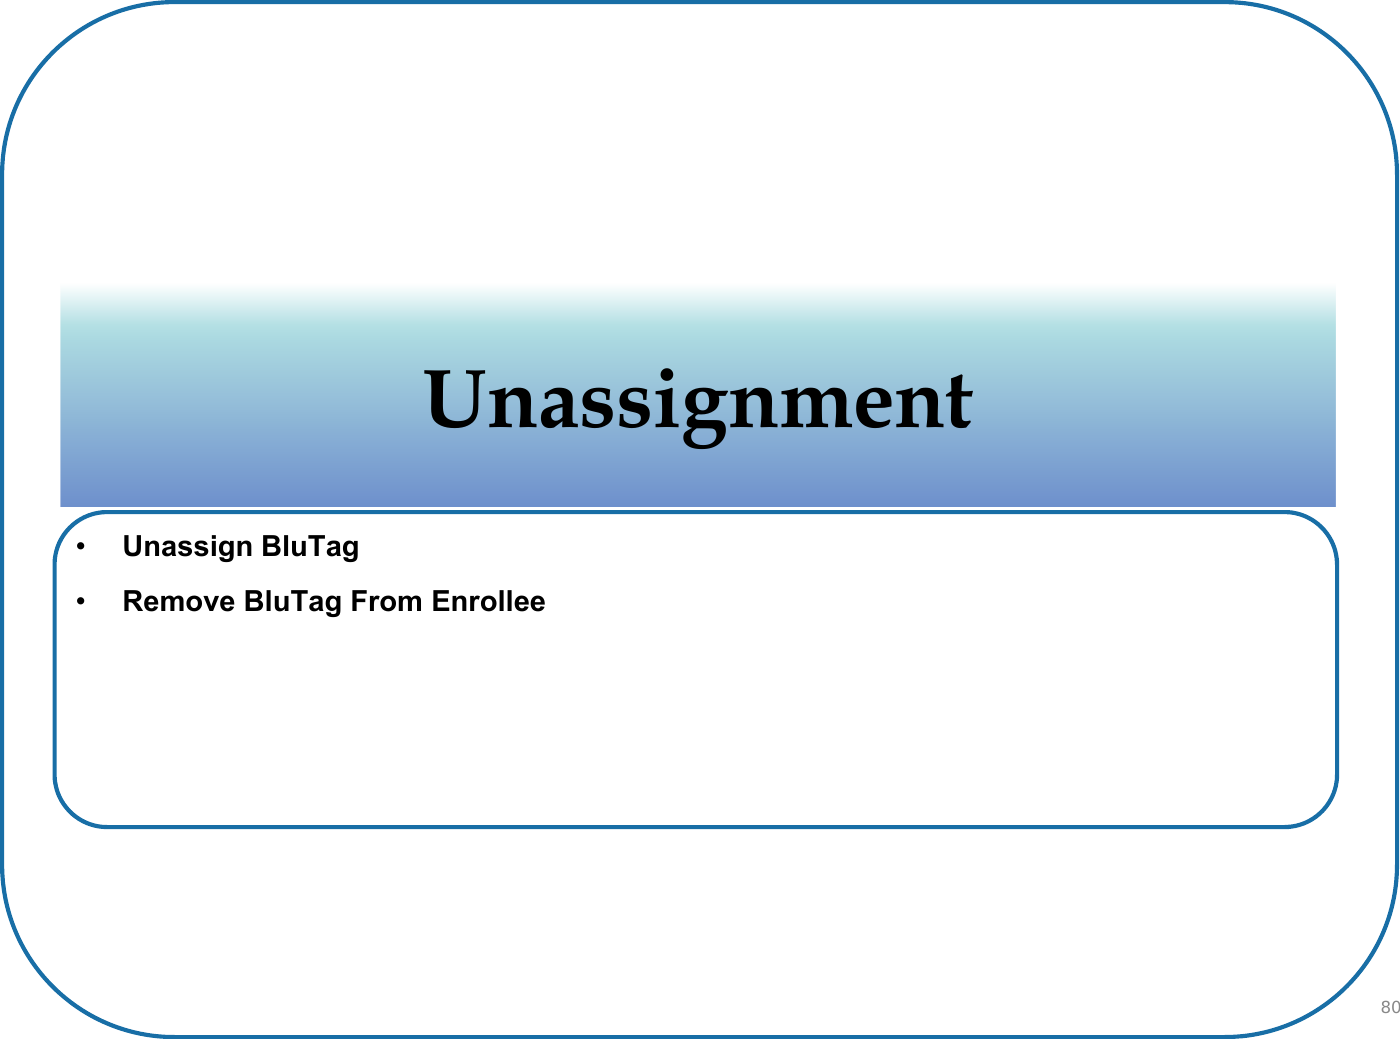 UnassignmentUnassignment•Unassign BluTag•Remove BluTag From Enrollee80